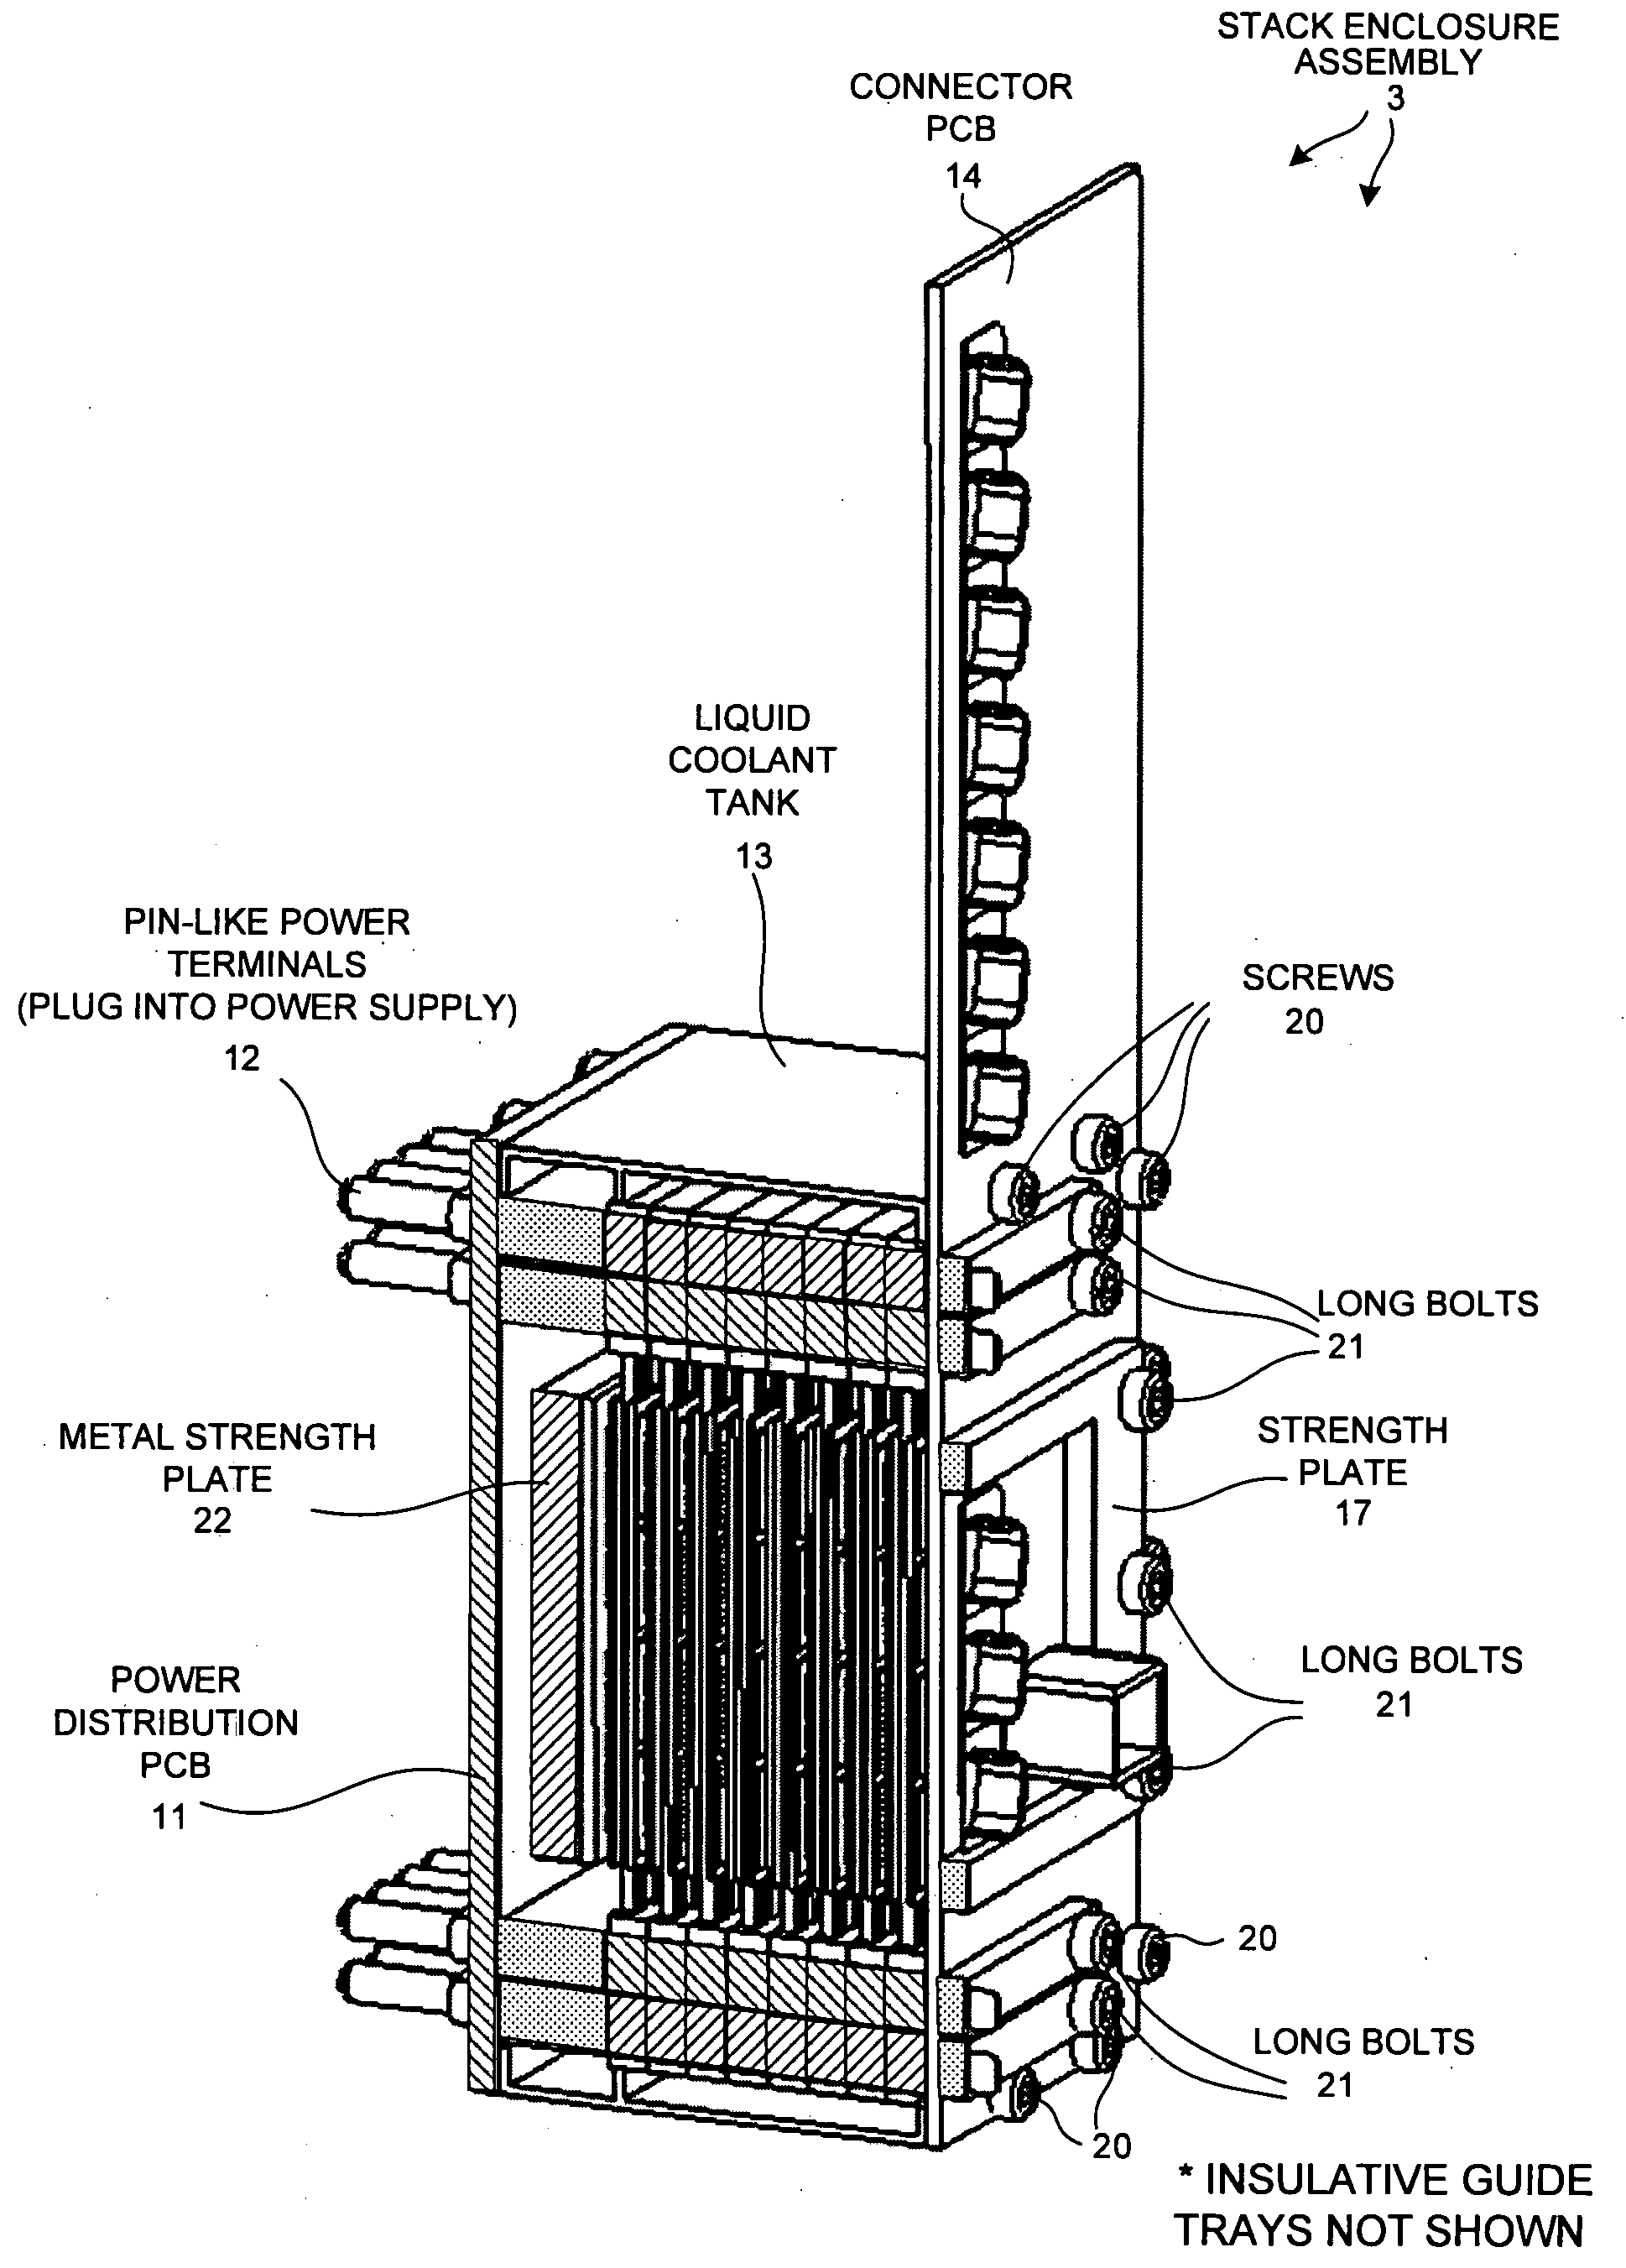 Semiconductor substrate elastomeric stack